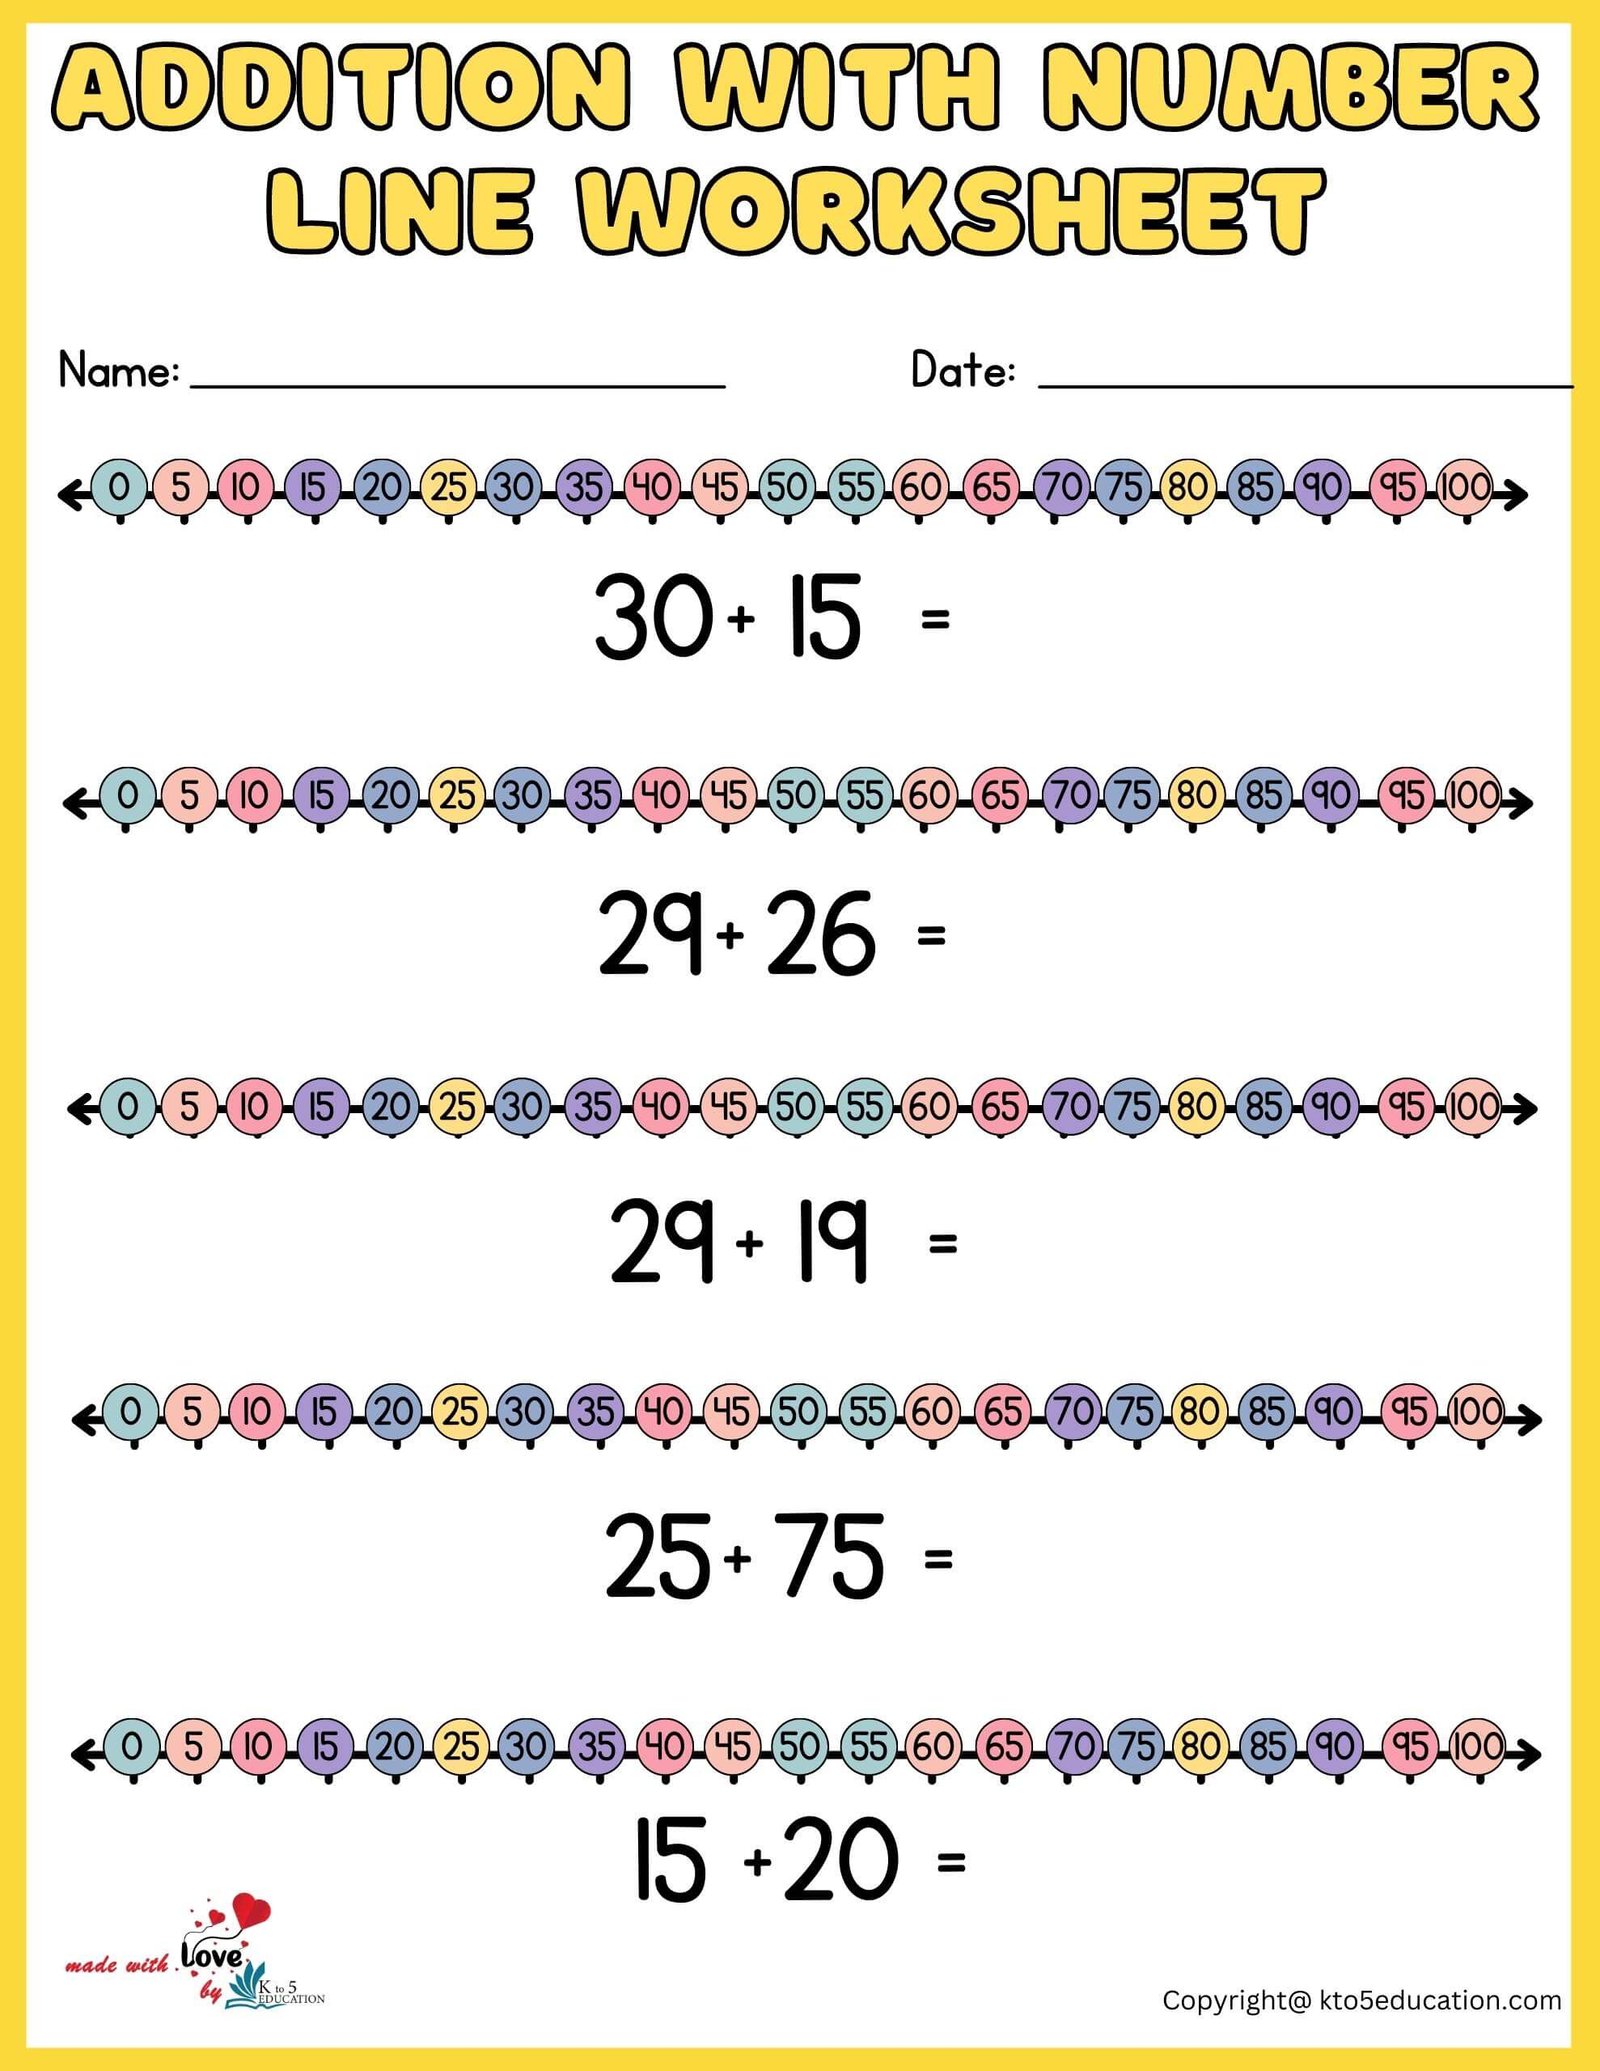 Addition With Number Line Worksheets 1-100